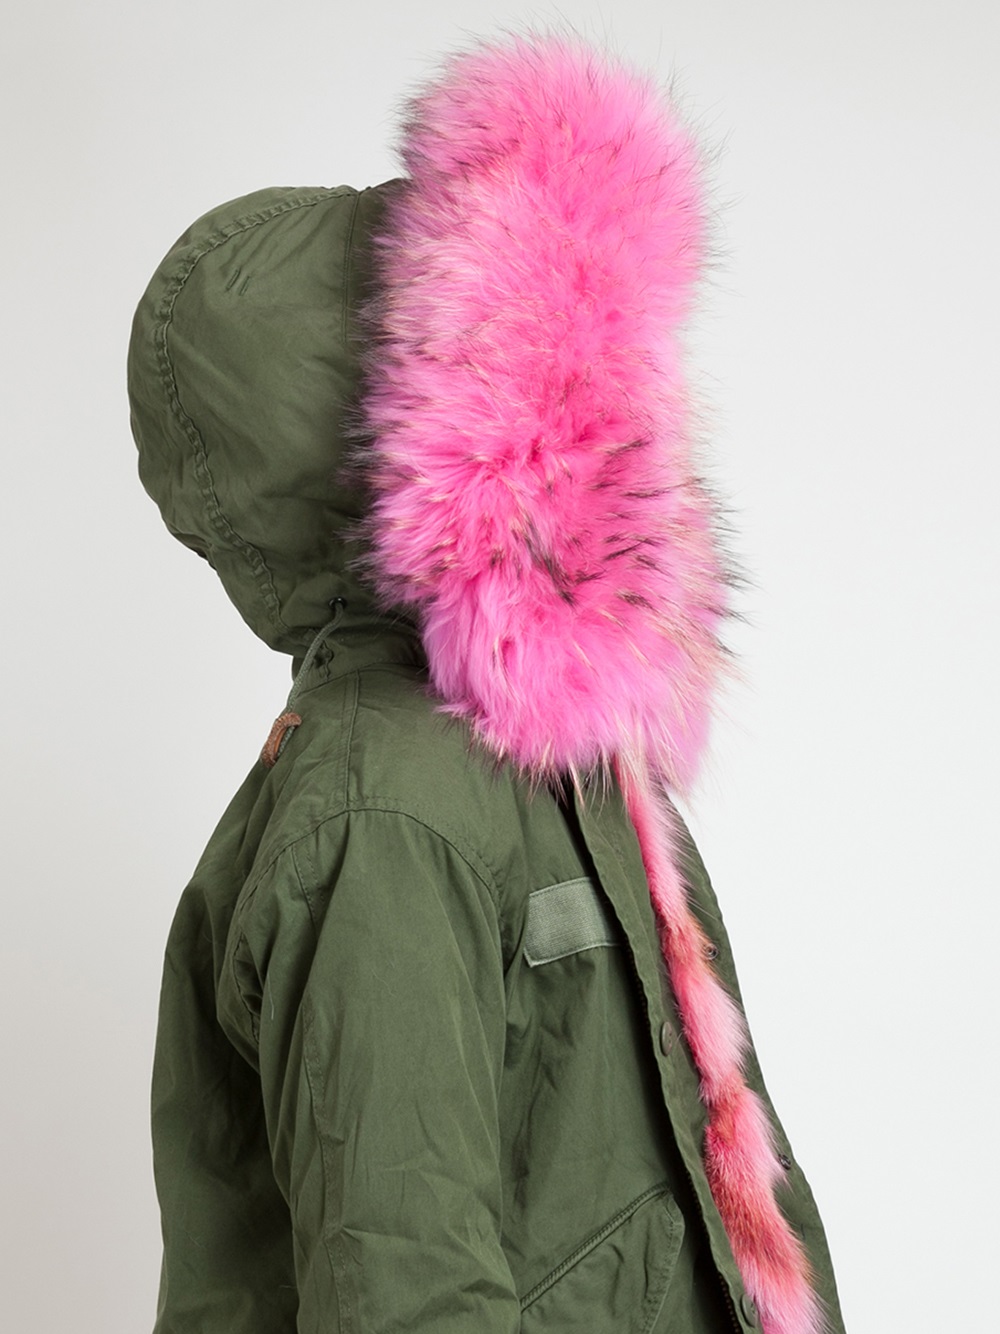 Mr & Mrs Italy Pink Fur Lined Parka Jacket in Green | Lyst